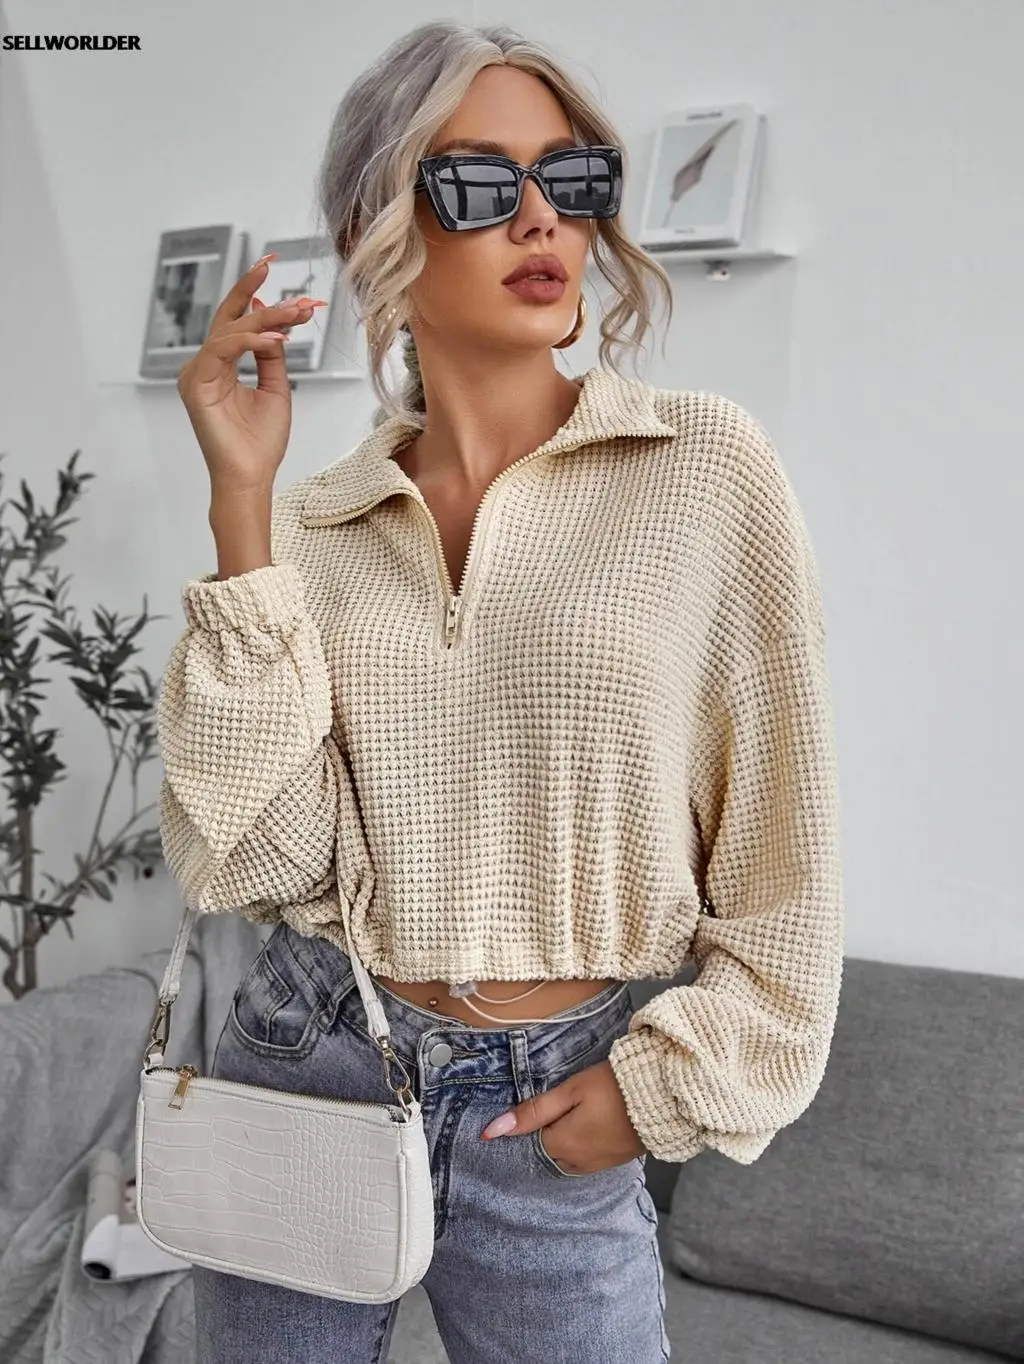 Women Drawstring lapel knitted pullover POLO shirt Long Sleeve Girl Streetwear Ladies White Sweater